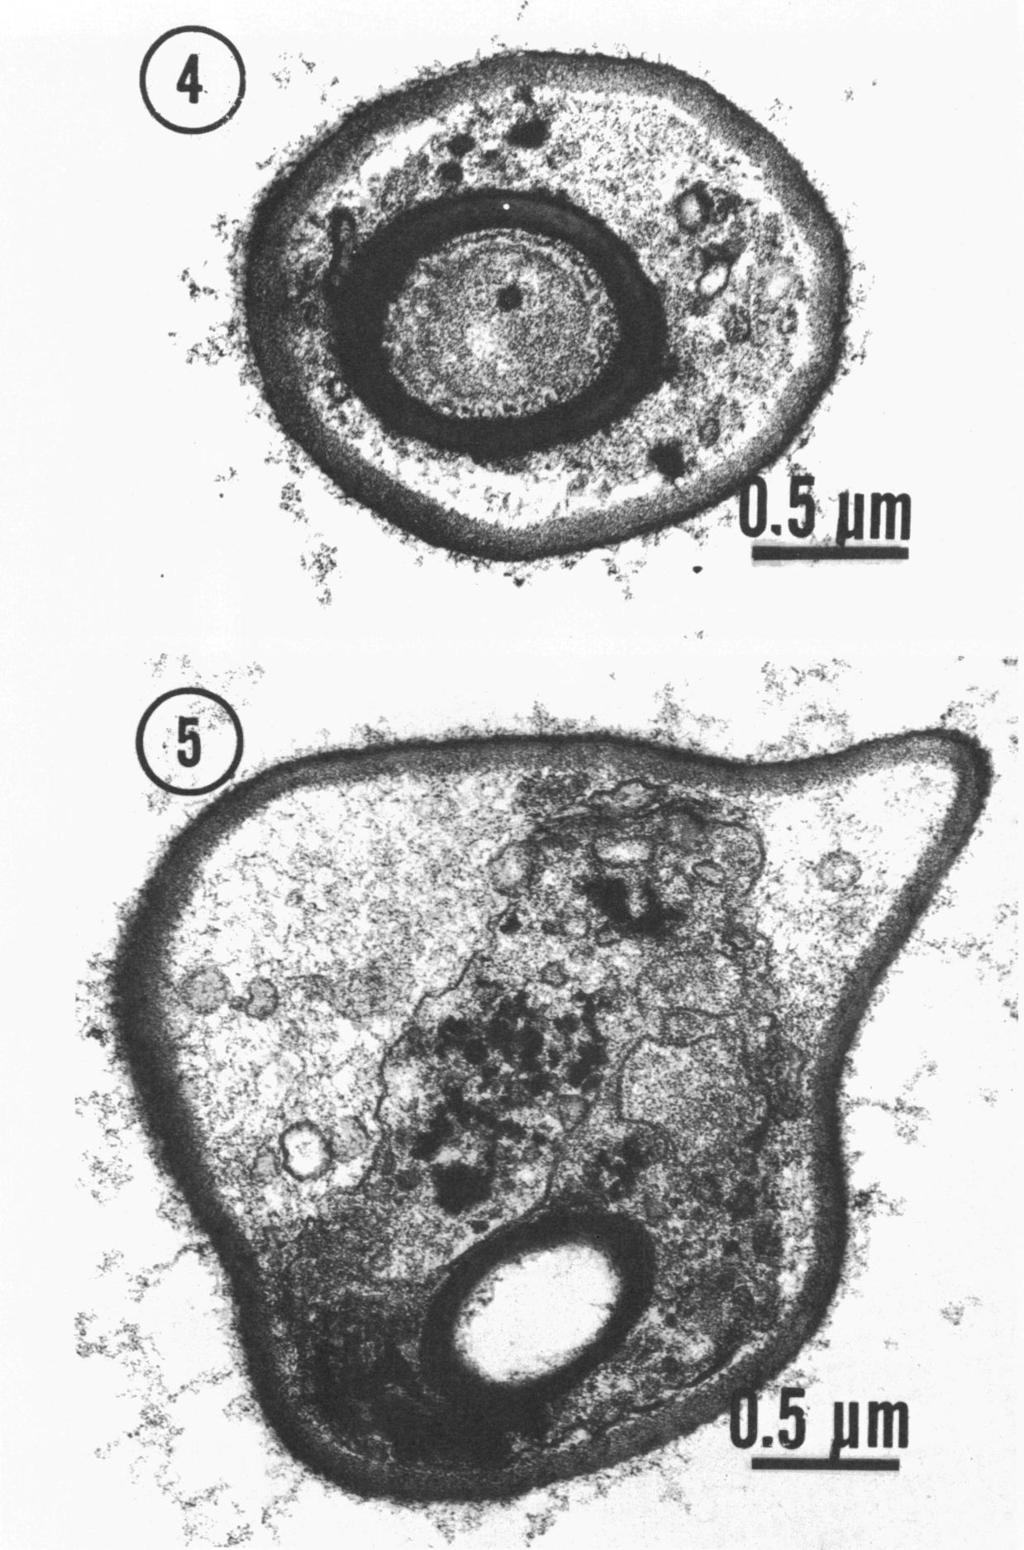 320 TALENS, MILLER, AND MIRANDA J. BACTERIOL. o.- FIG. 4. Thin section of an ascus of M. krissii containing a single ascospore. The cross section is from the pedunculate portion of the ascus.